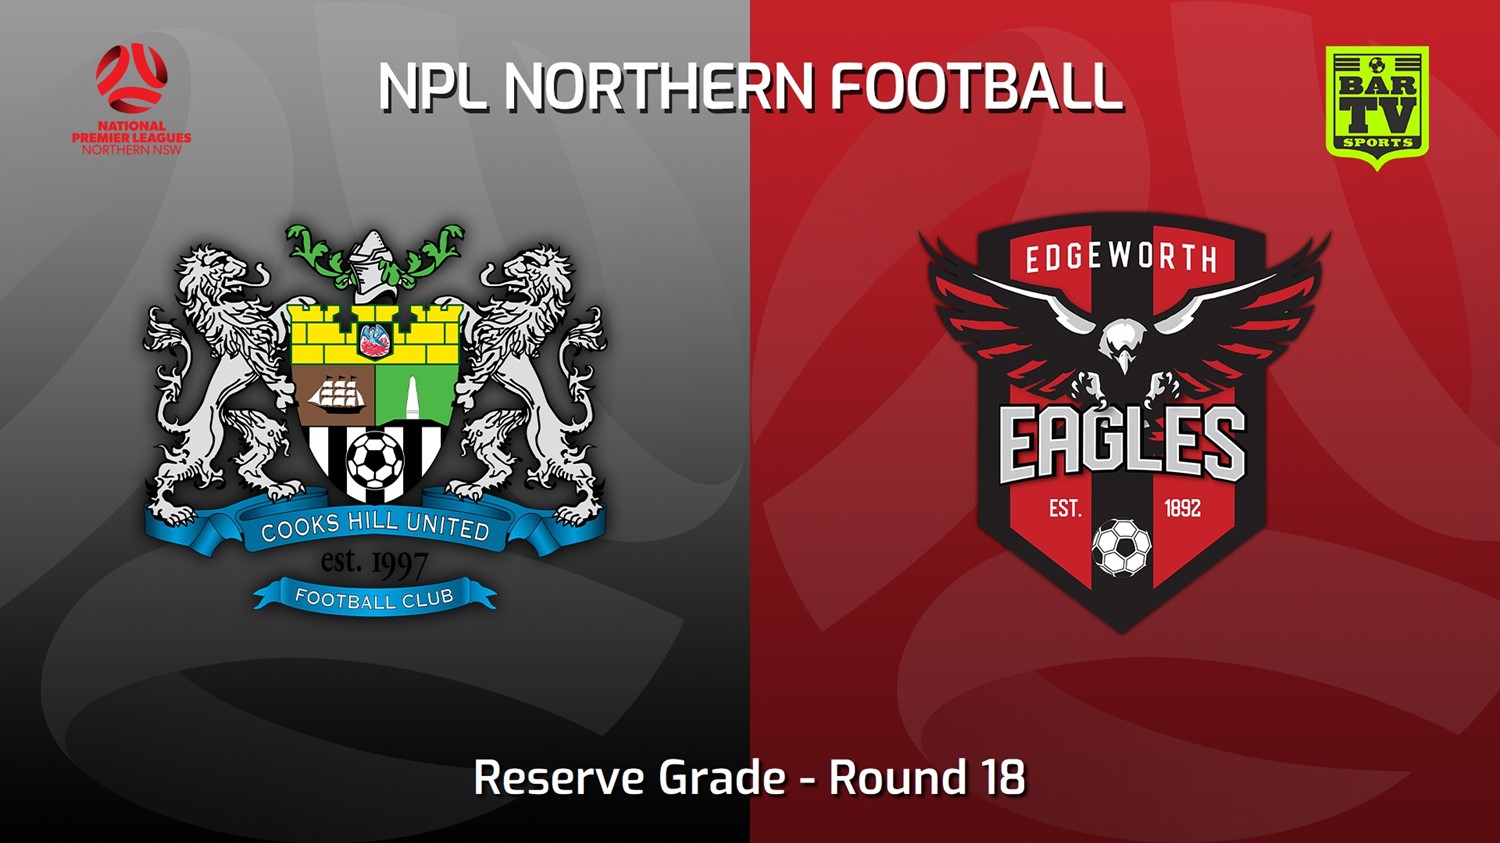 230708-NNSW NPLM Res Round 18 - Cooks Hill United FC (Res) v Edgeworth Eagles Res Minigame Slate Image